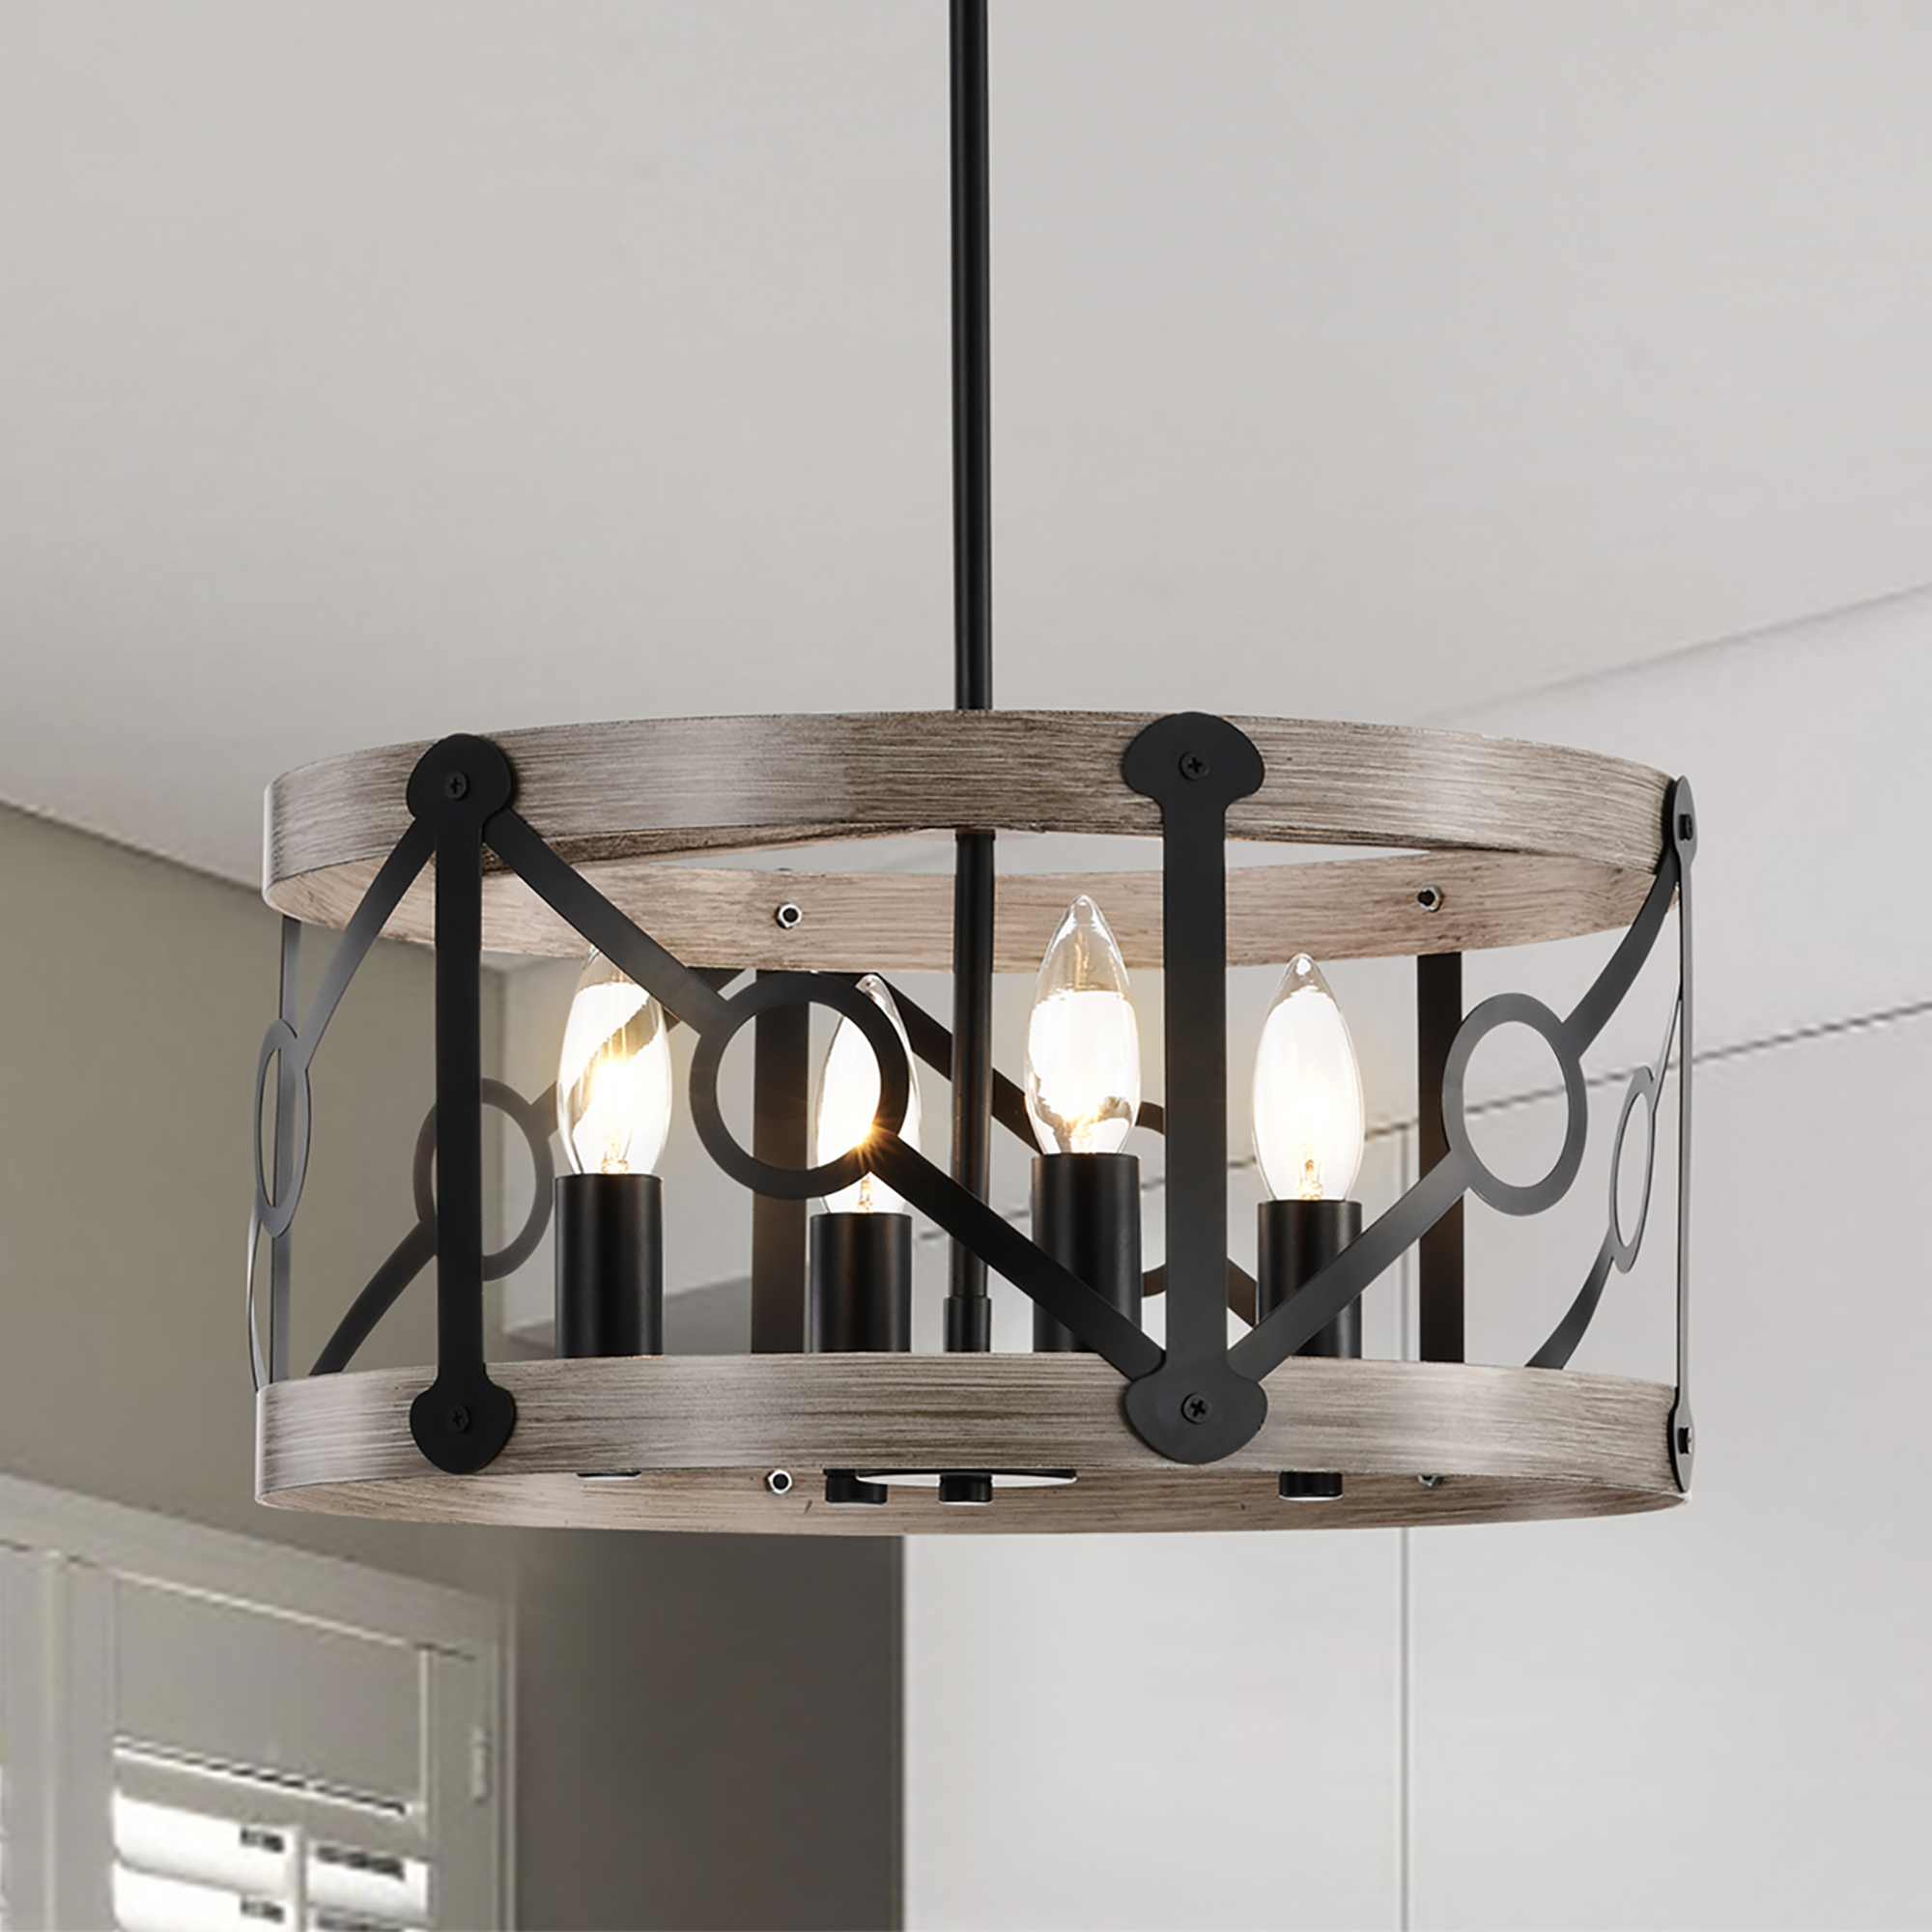 Copas 16 in. 4-Light Indoor Matte Black and Faux Wood Grain Finish Chandelier with Light Kit